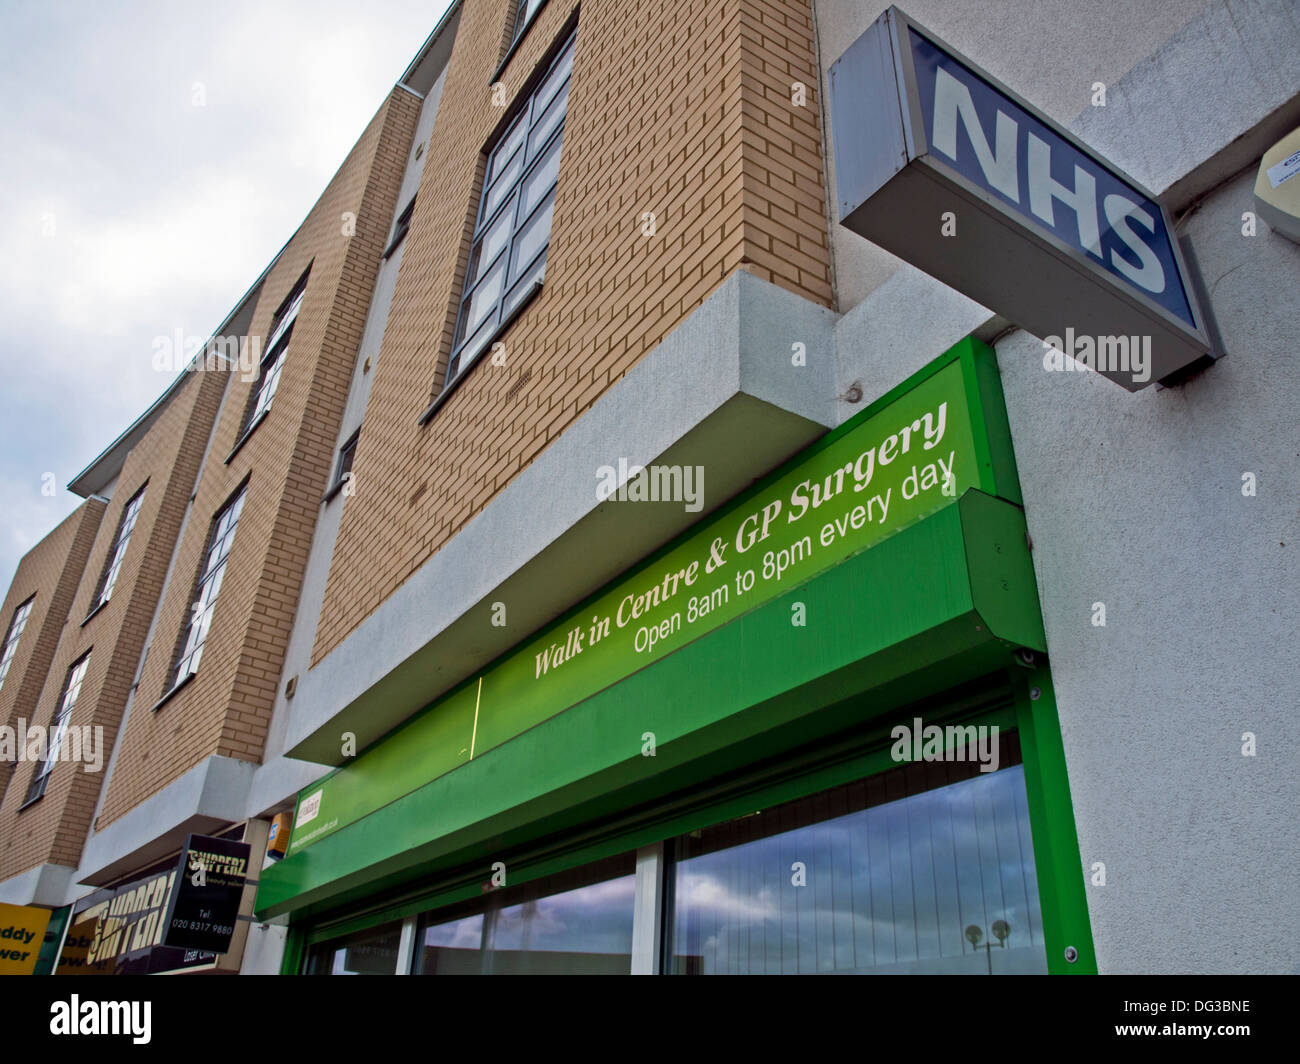 NHS Walk-In Centre and GP Surgery, Thamesmead, London, England, United Kingdom Stock Photo